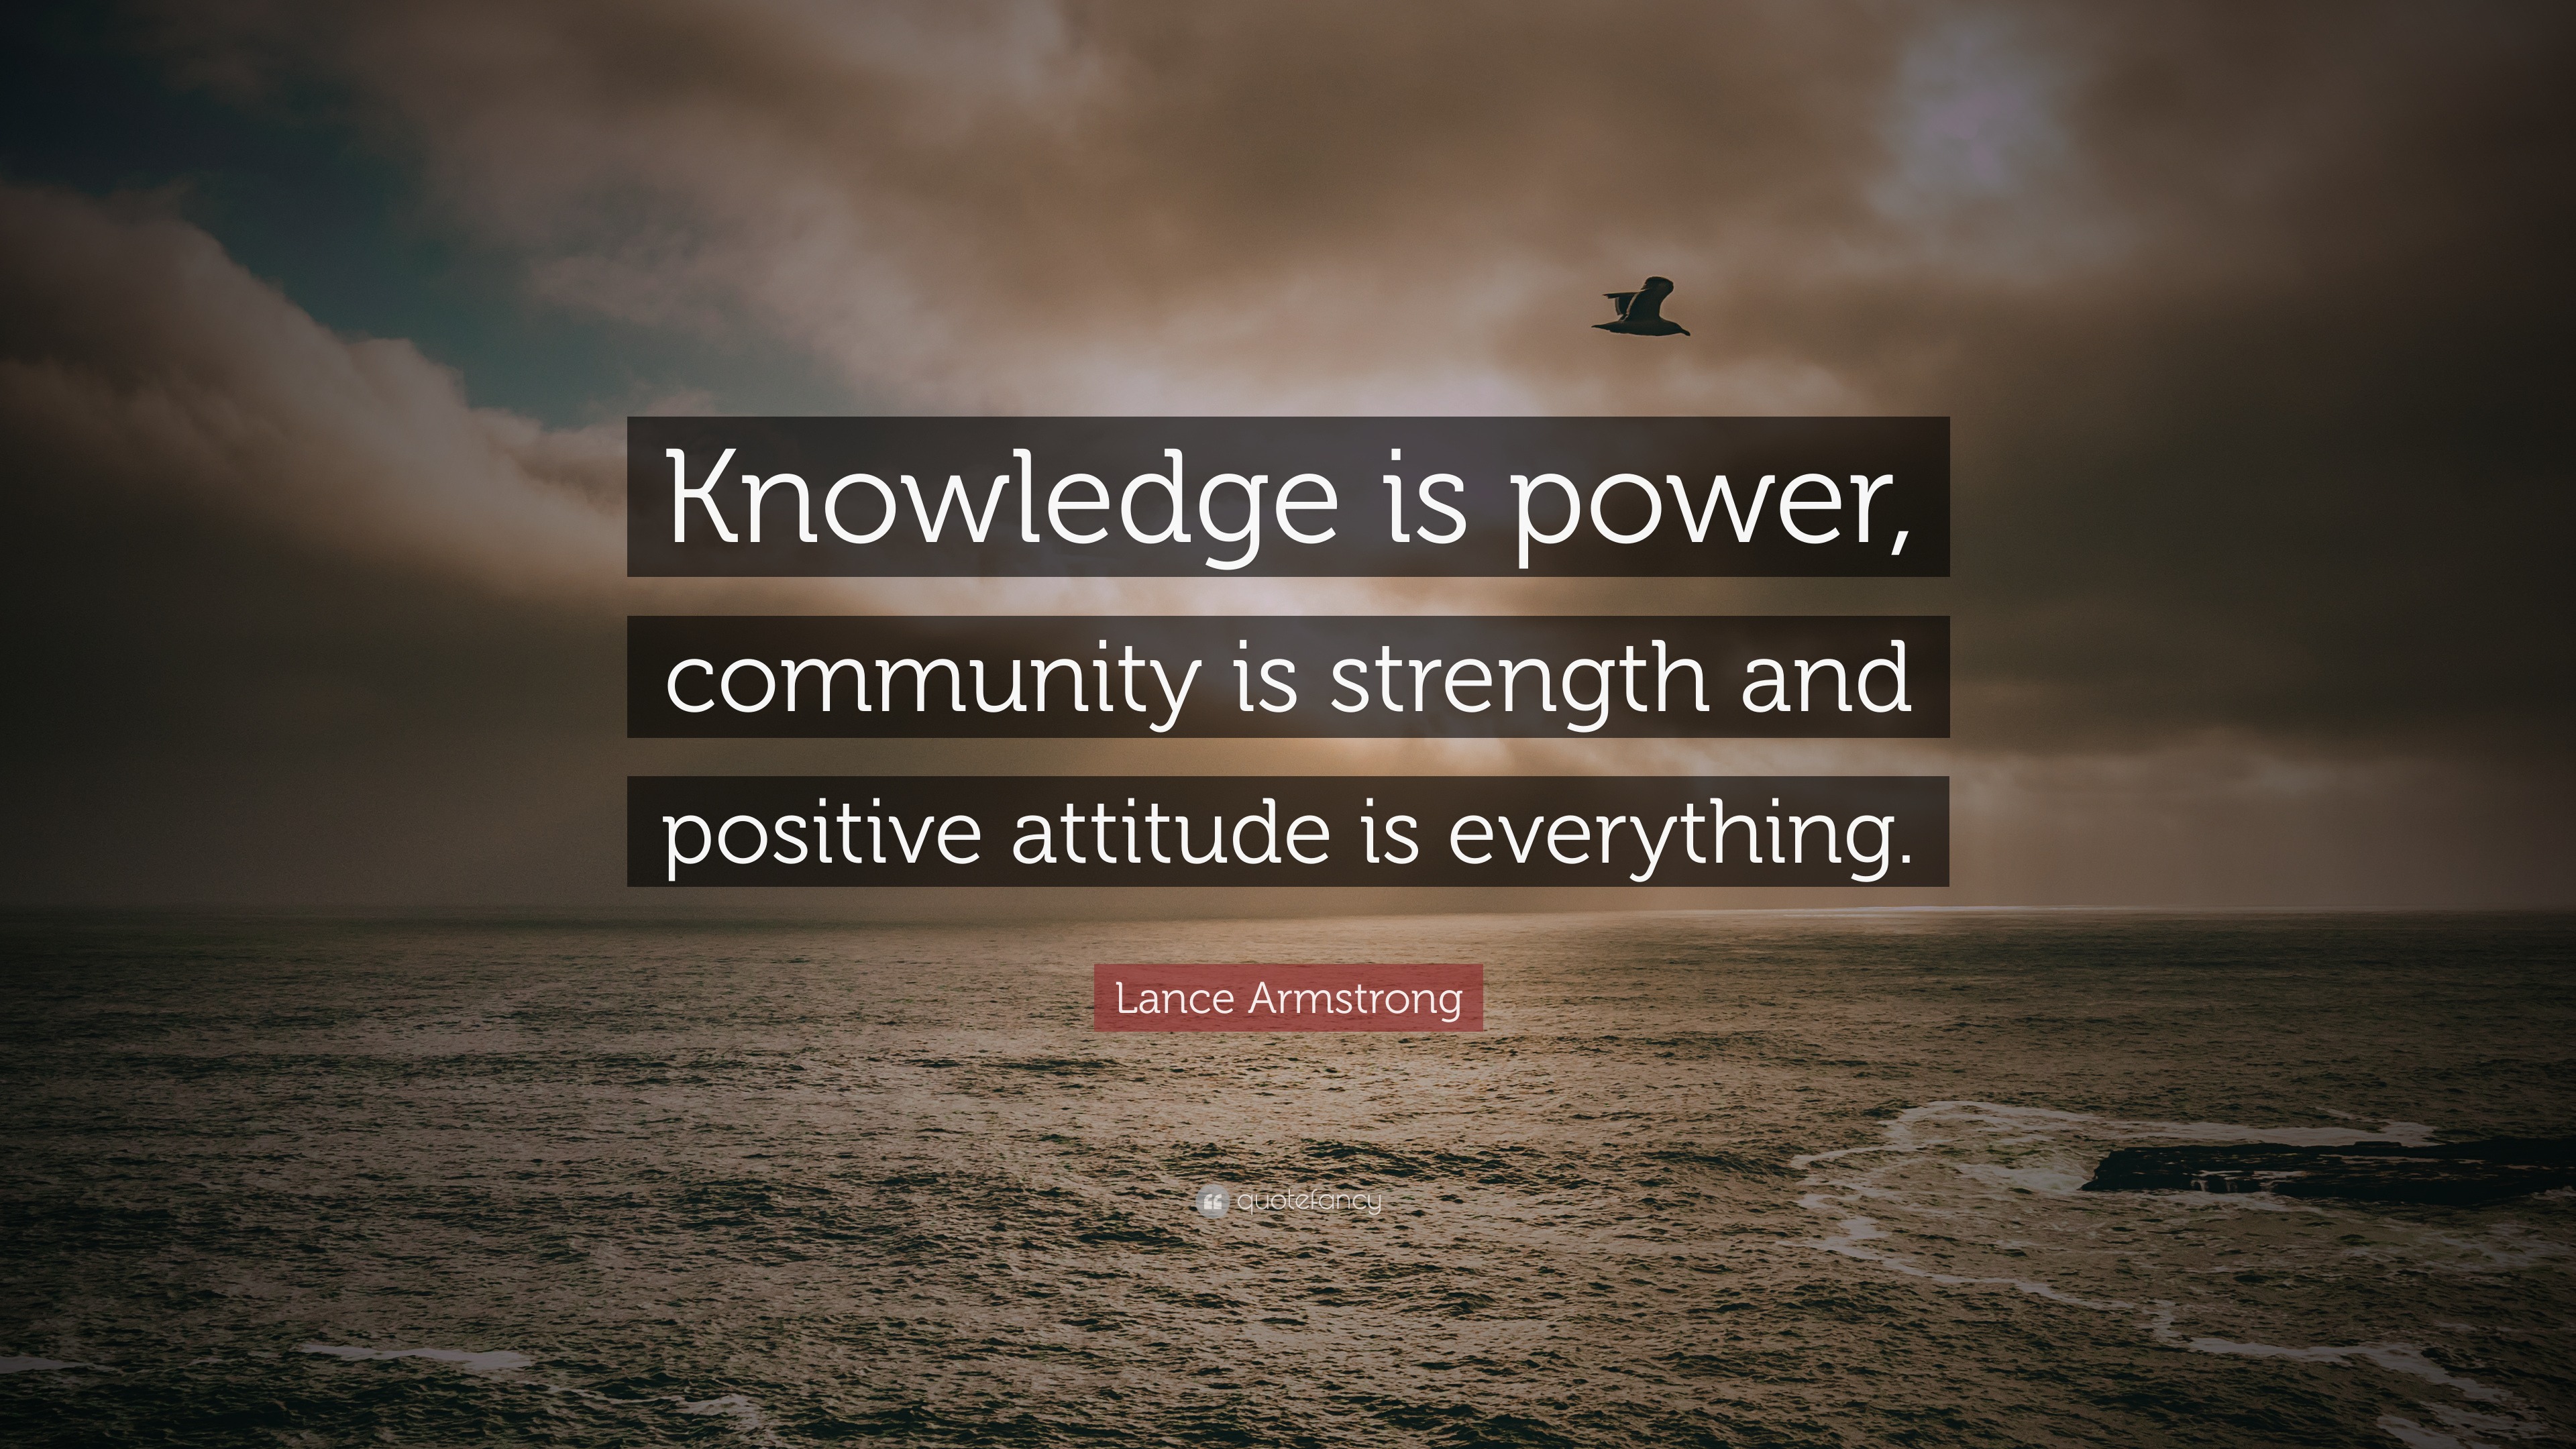 Lance Armstrong Quote “Knowledge is power, community is